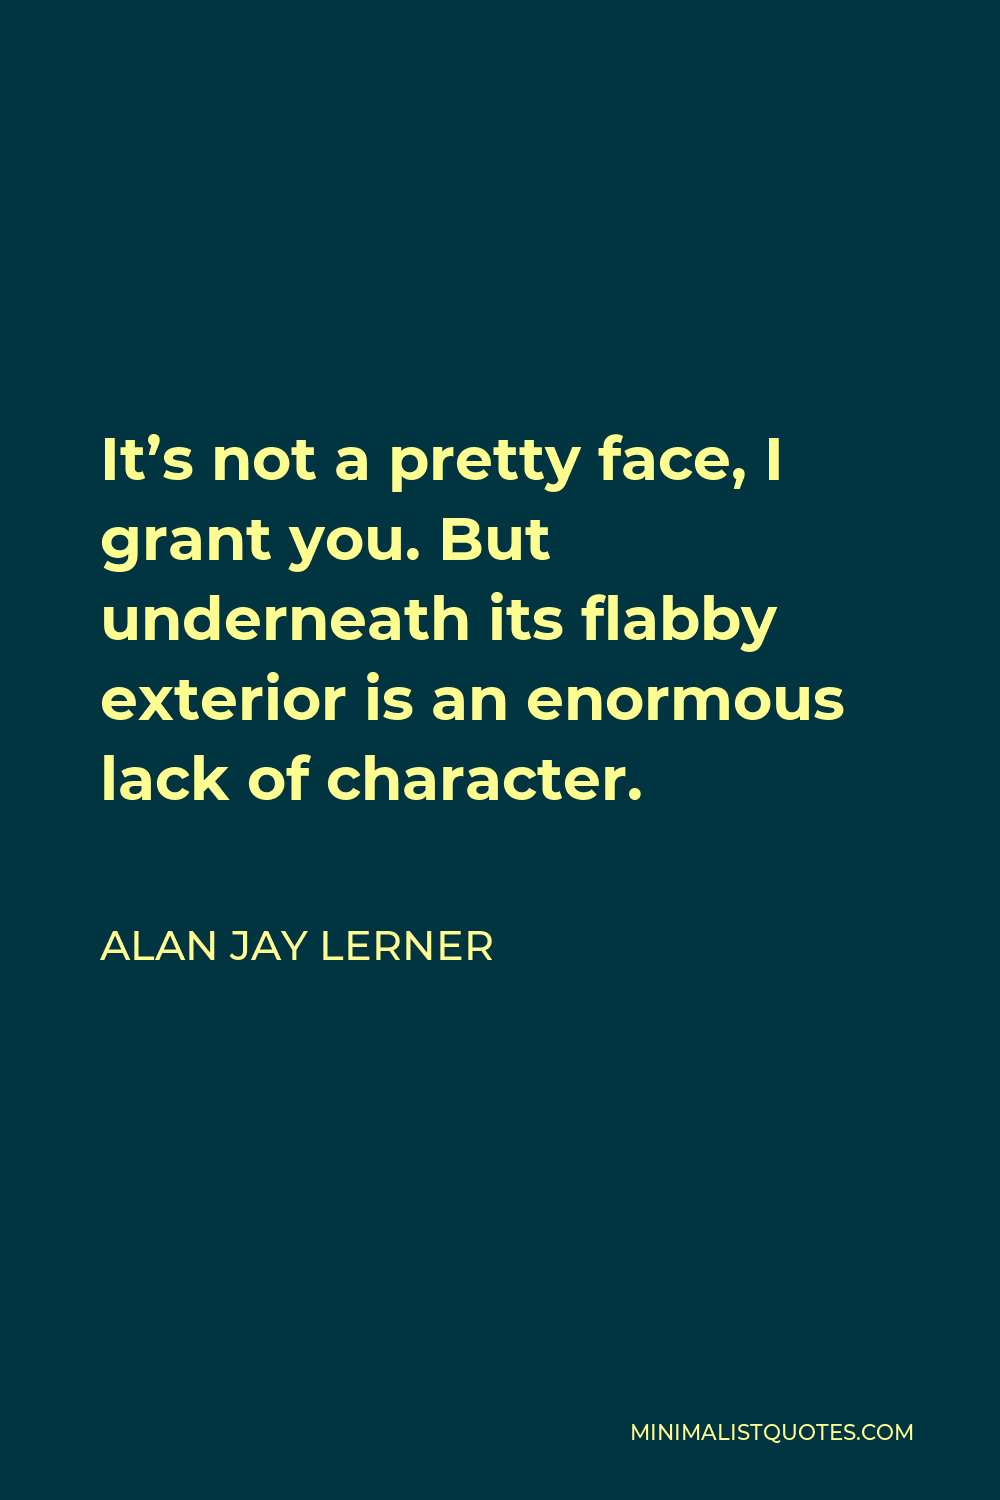 Alan Jay Lerner Quote - It’s not a pretty face, I grant you. But underneath its flabby exterior is an enormous lack of character.